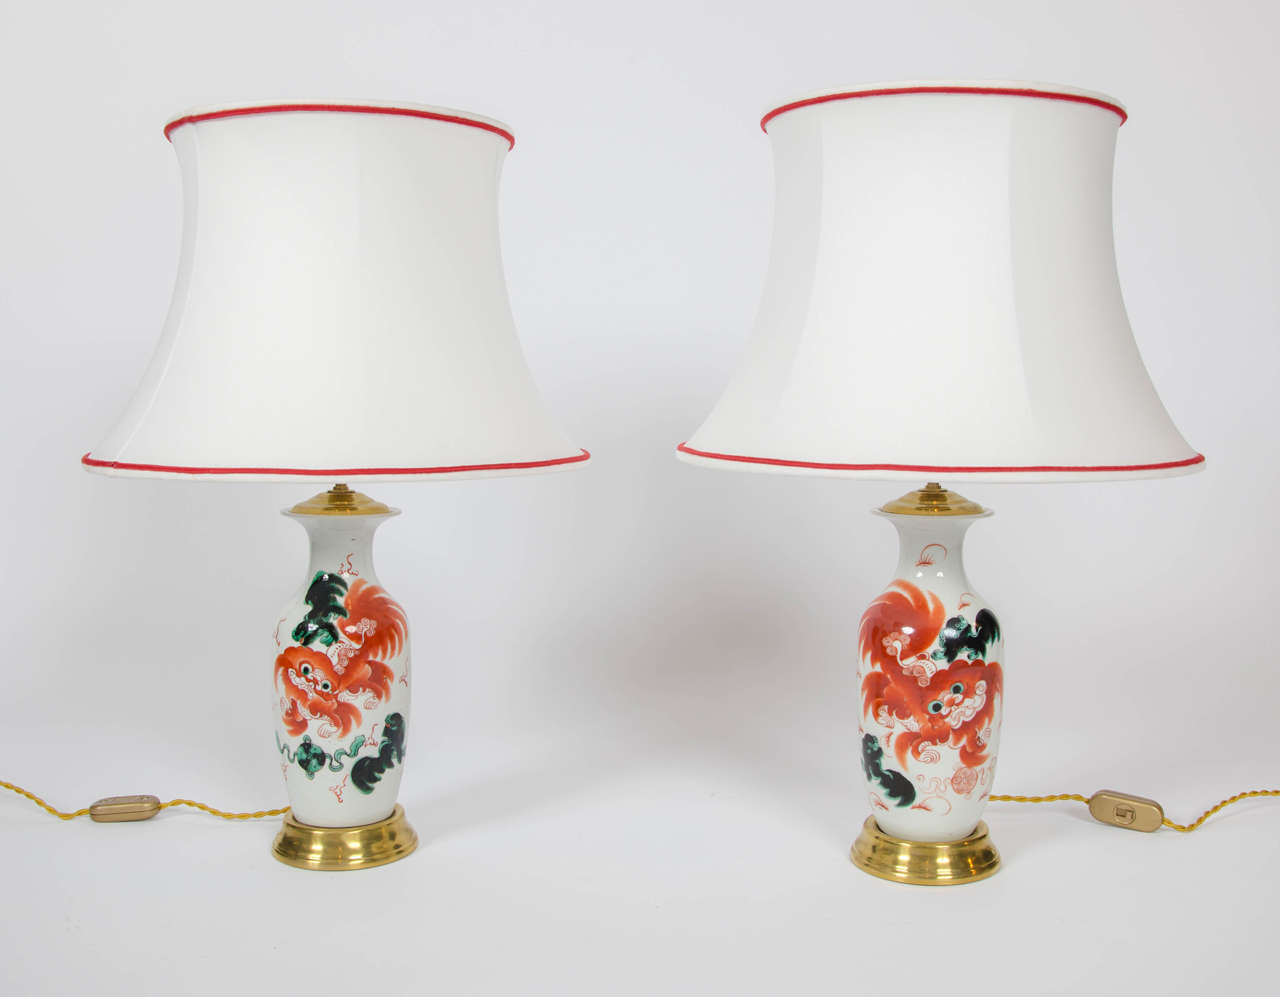 A very attractive pair of late 19th century Chinese vases now as table lamps, with a corresponding cup and cover. Depicting red dragons on a white background and green decoration. 